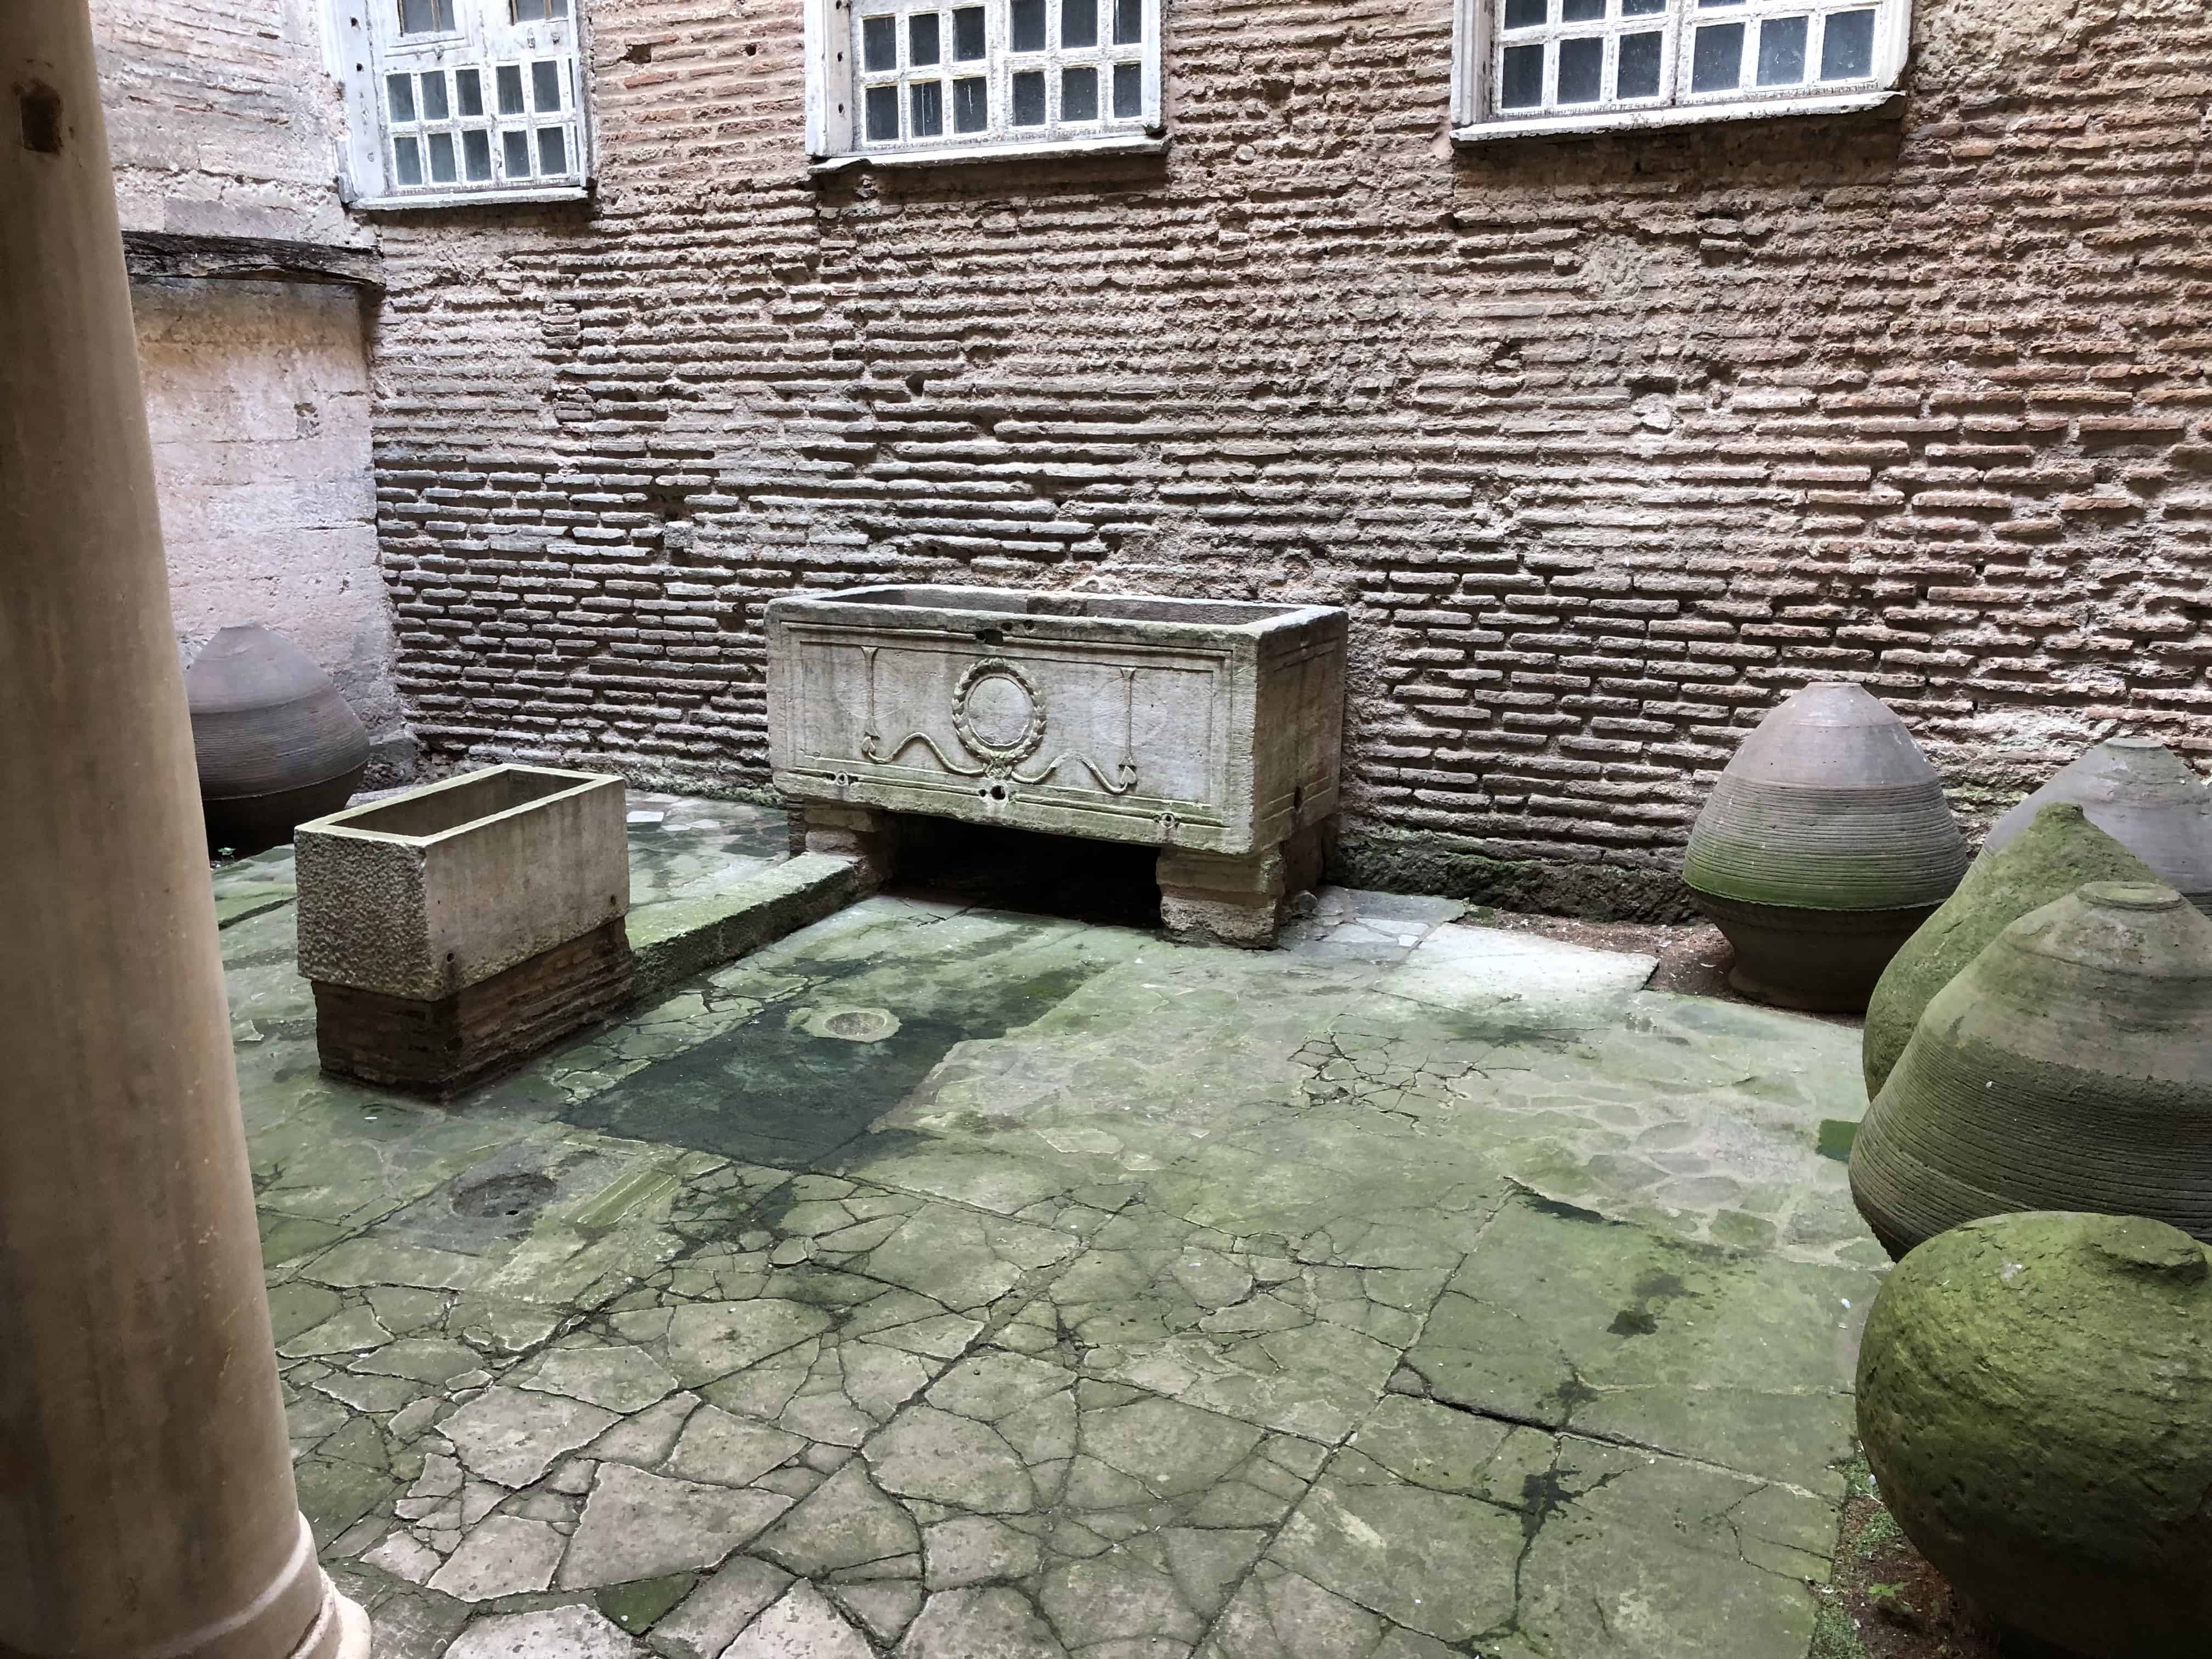 Courtyard of the baptistry at Hagia Sophia in Istanbul, Turkey